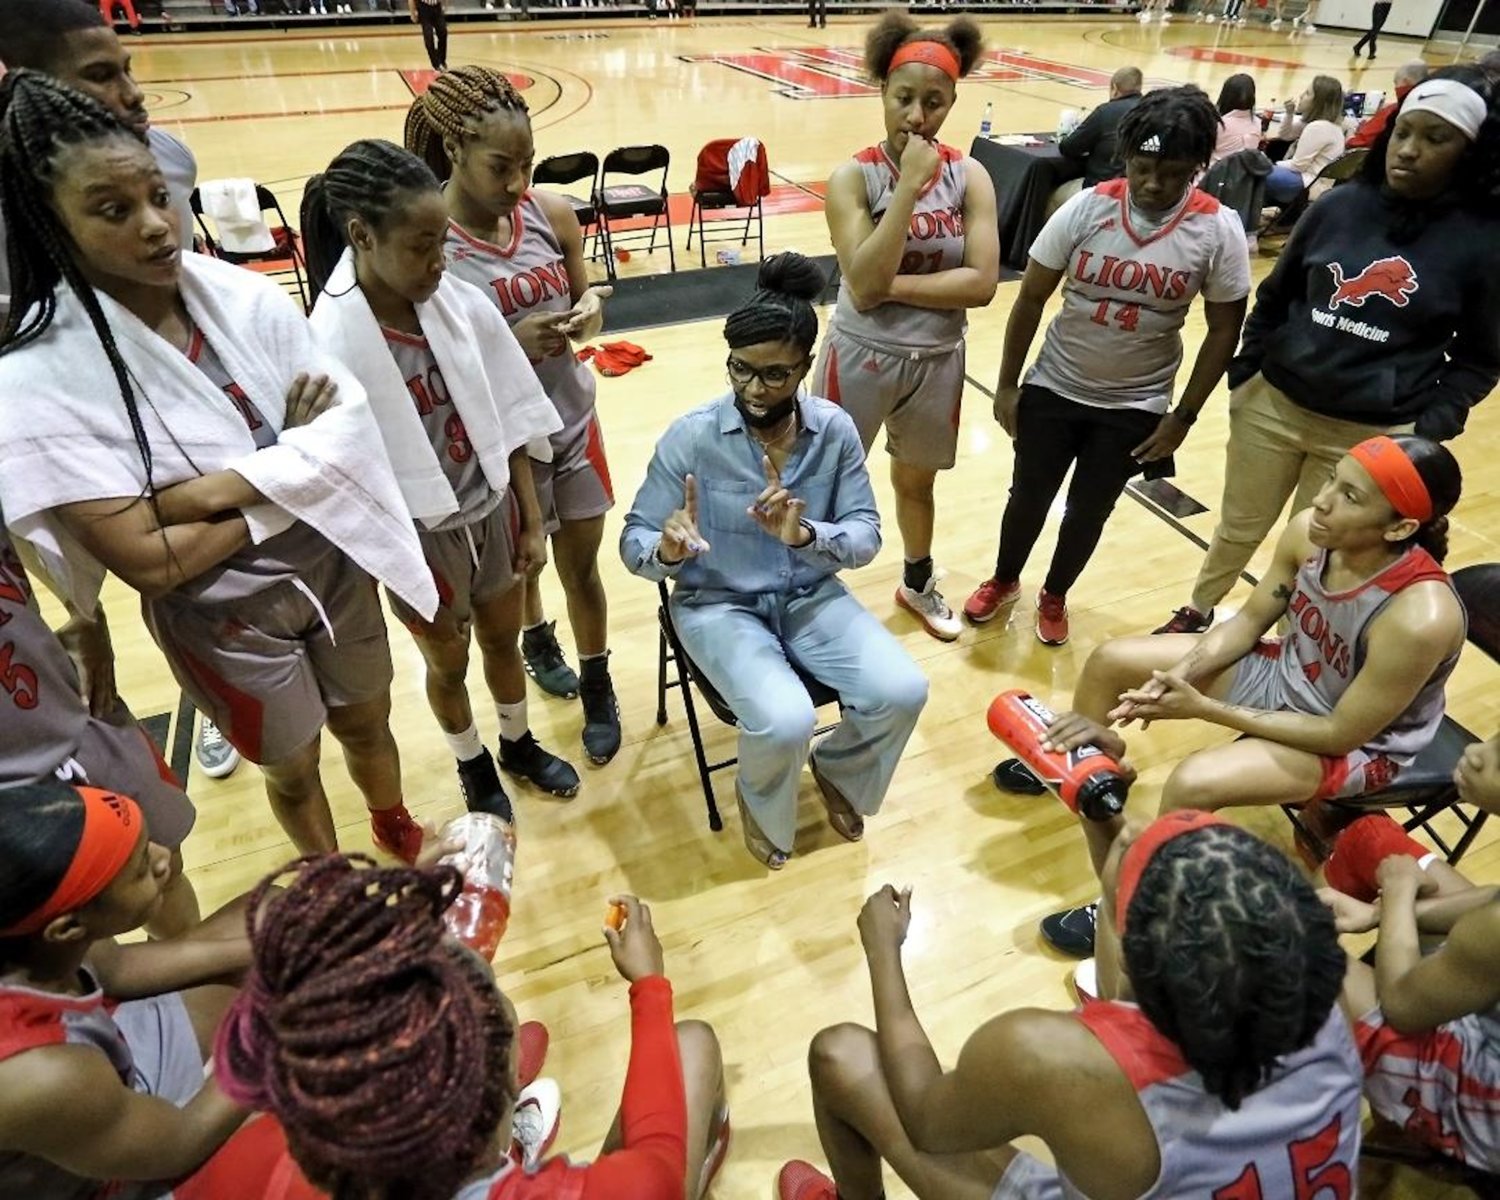 Coach Sharon Thompson’s East Mississippi Lady Lions listen up during a timeout in an earlier game. In the other photo, Ja’Mia Hollings takes a shot in an earlier game. The Lady Lions were 12-4 when they played Coahoma in the semifinals Wednesday at Mississippi College.